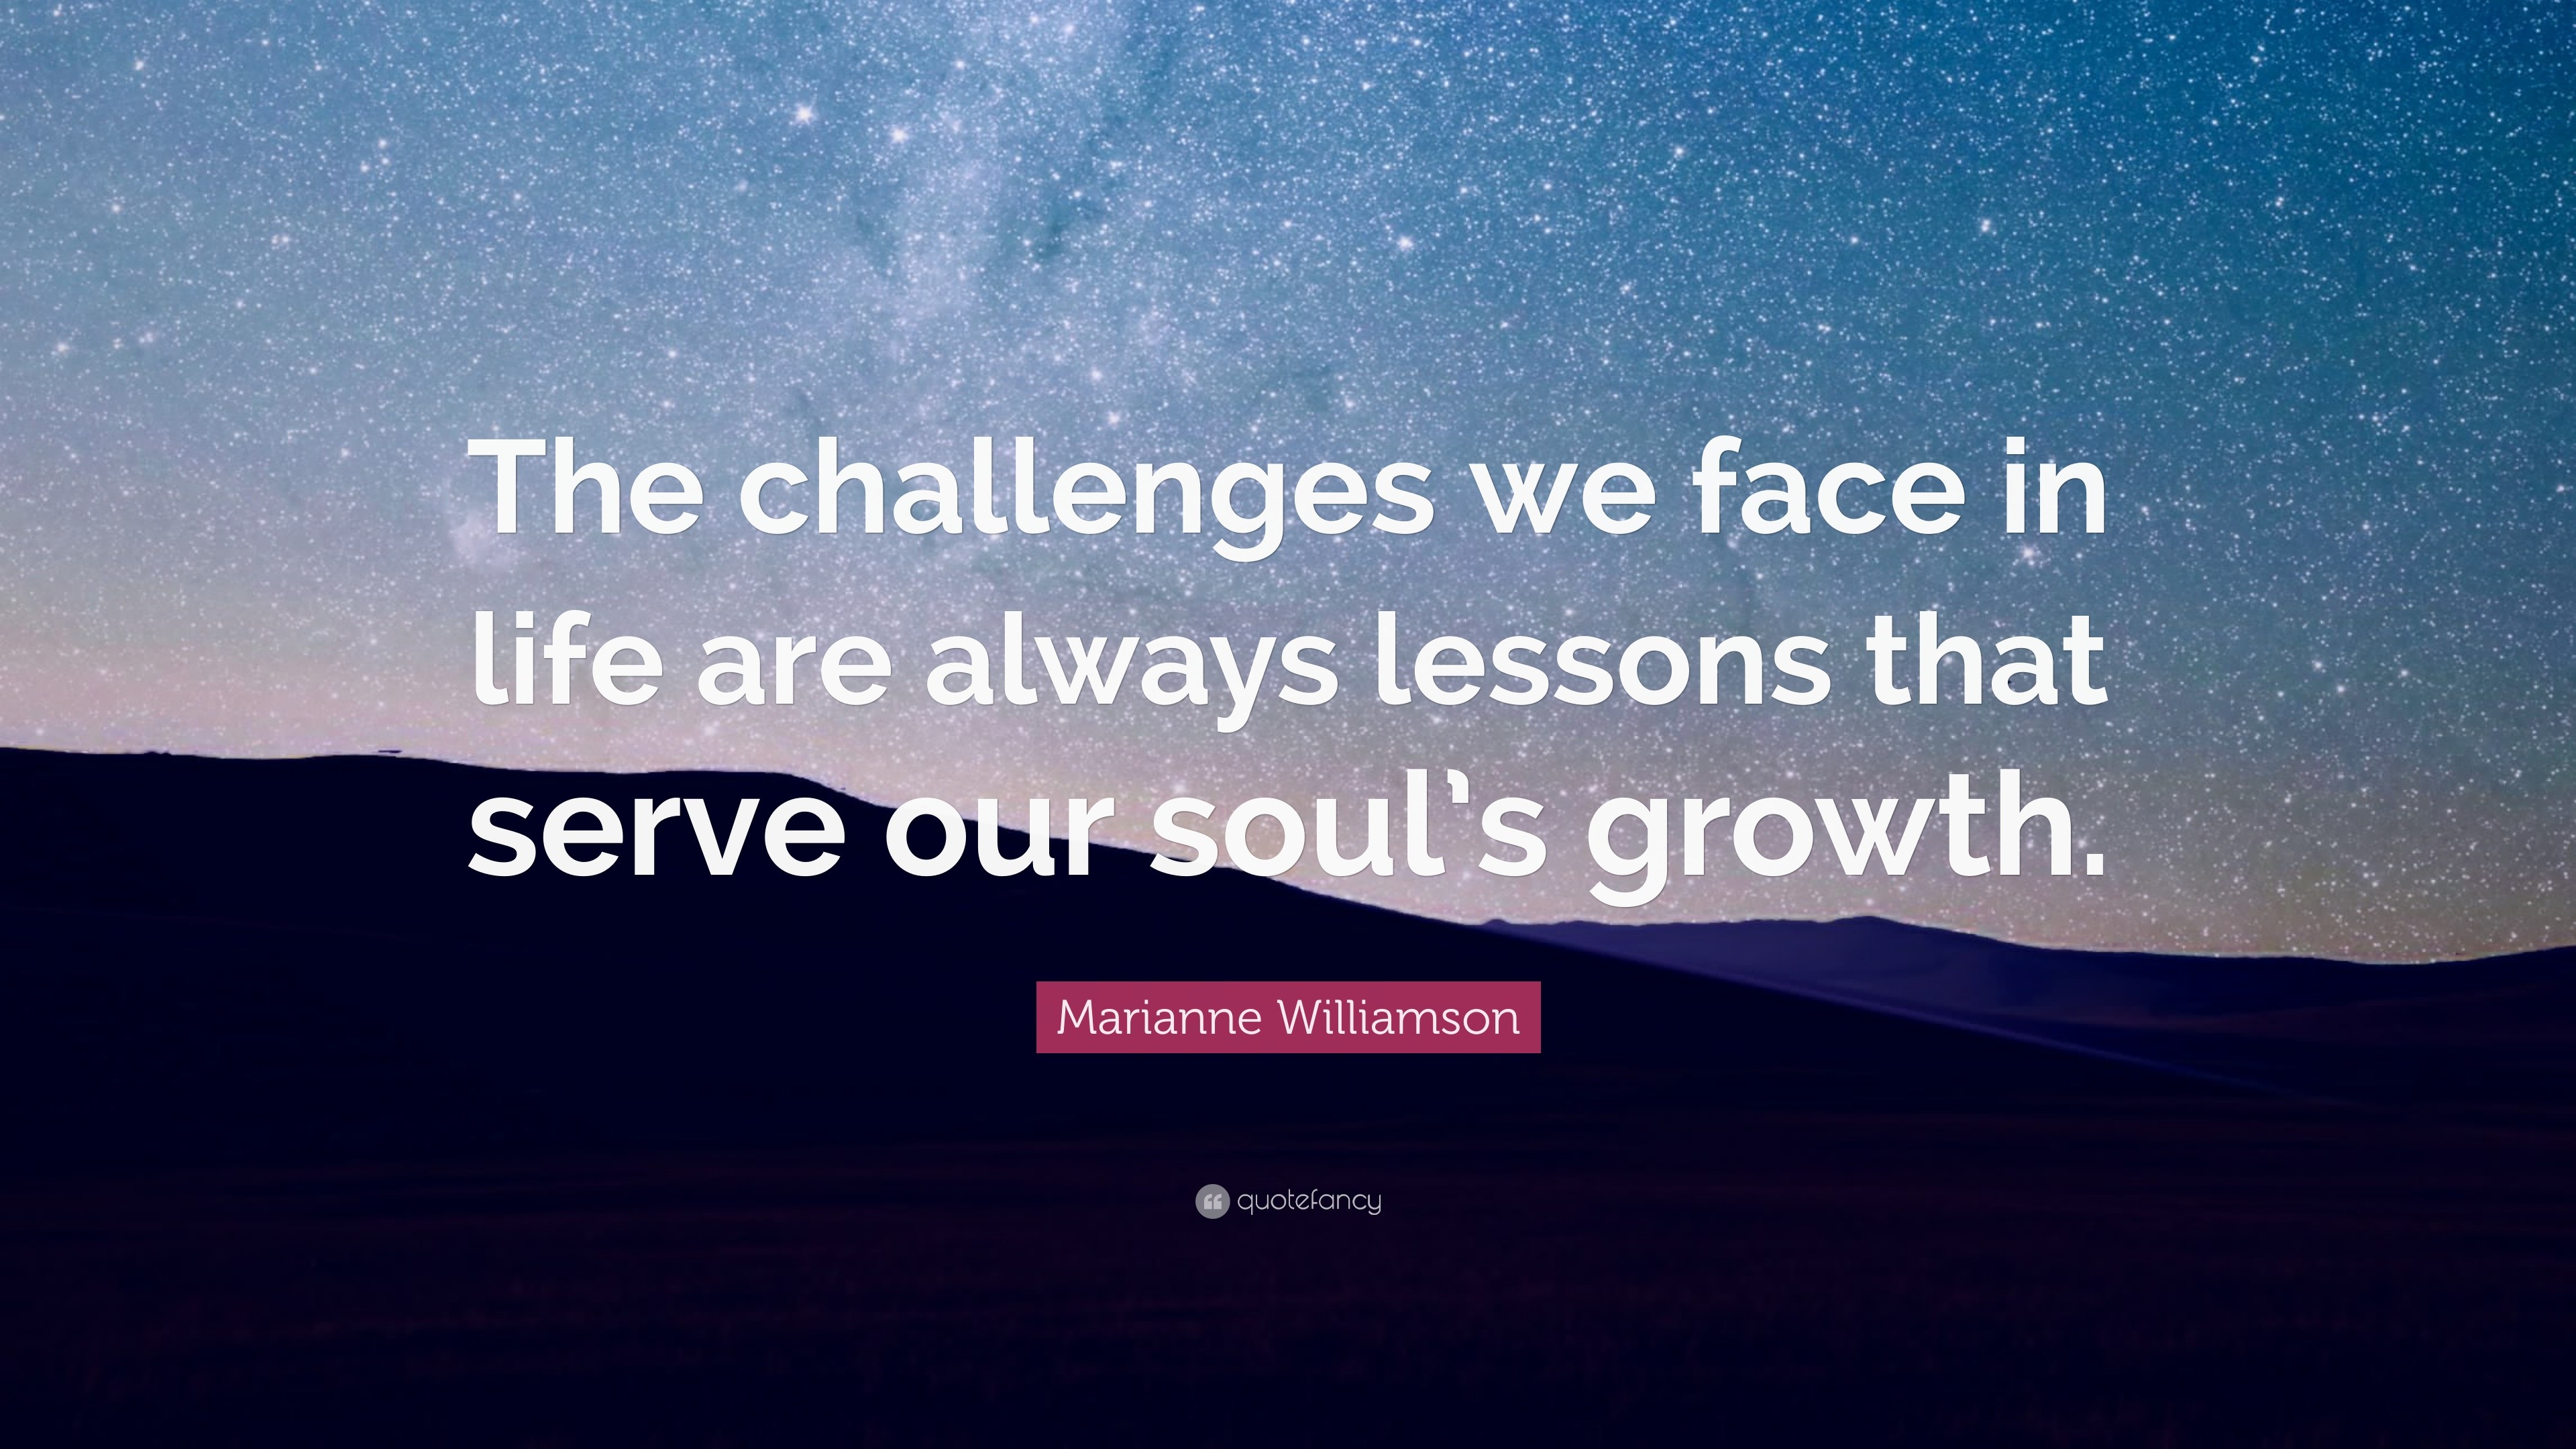 Marianne Williamson Quote “The challenges we face in life